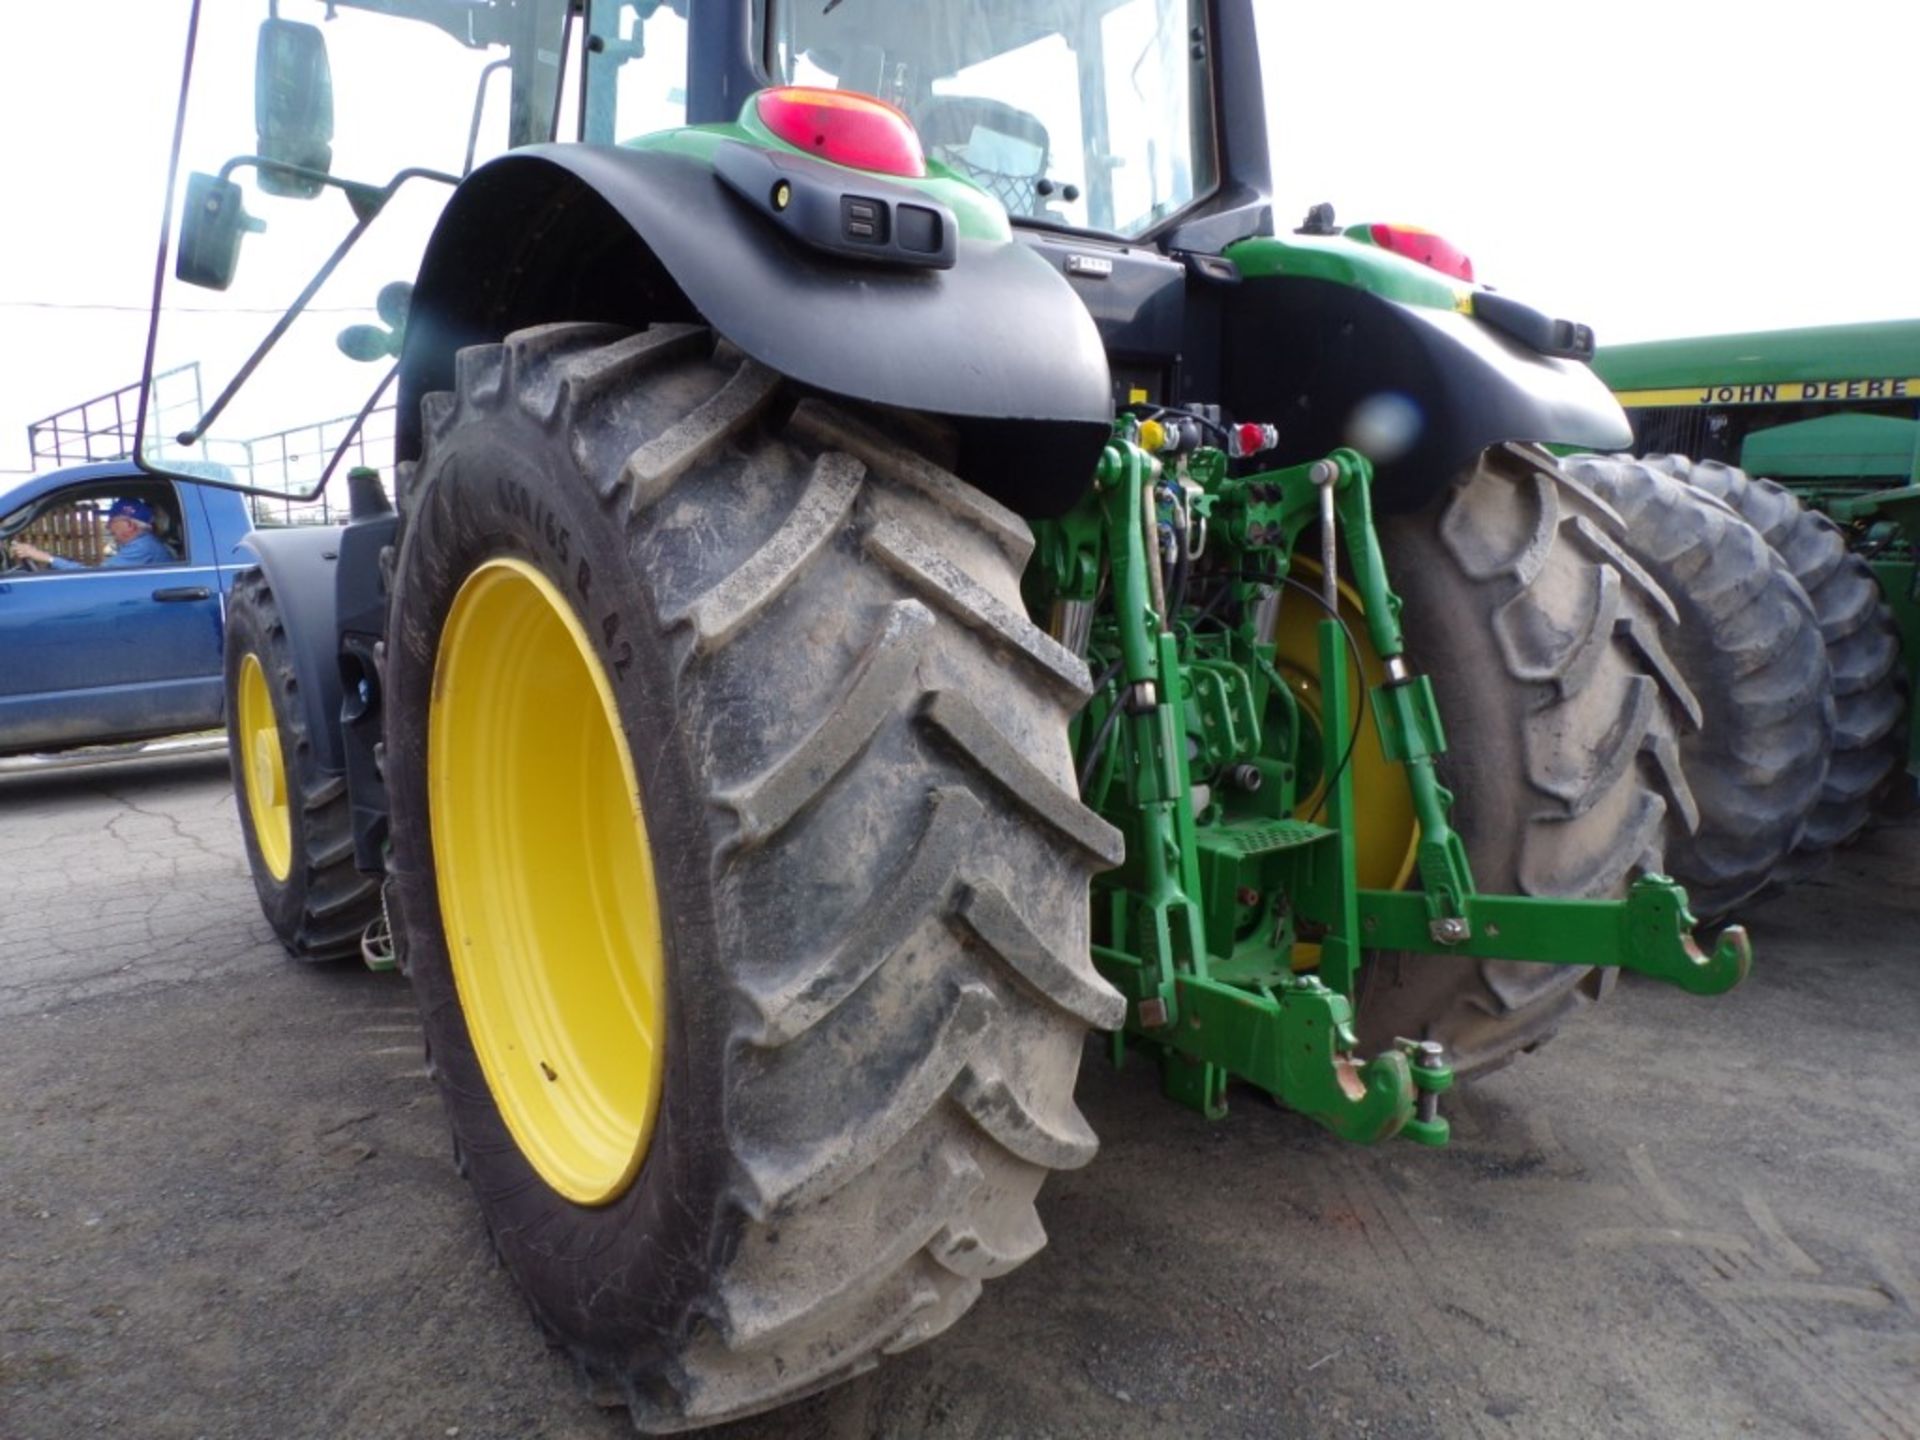 2021 John Deere 6195M, 4 WD Tractor, Power Shift Tans w/Screen, Rear Hyd. Remotes, Air Brake Hookup, - Image 5 of 8